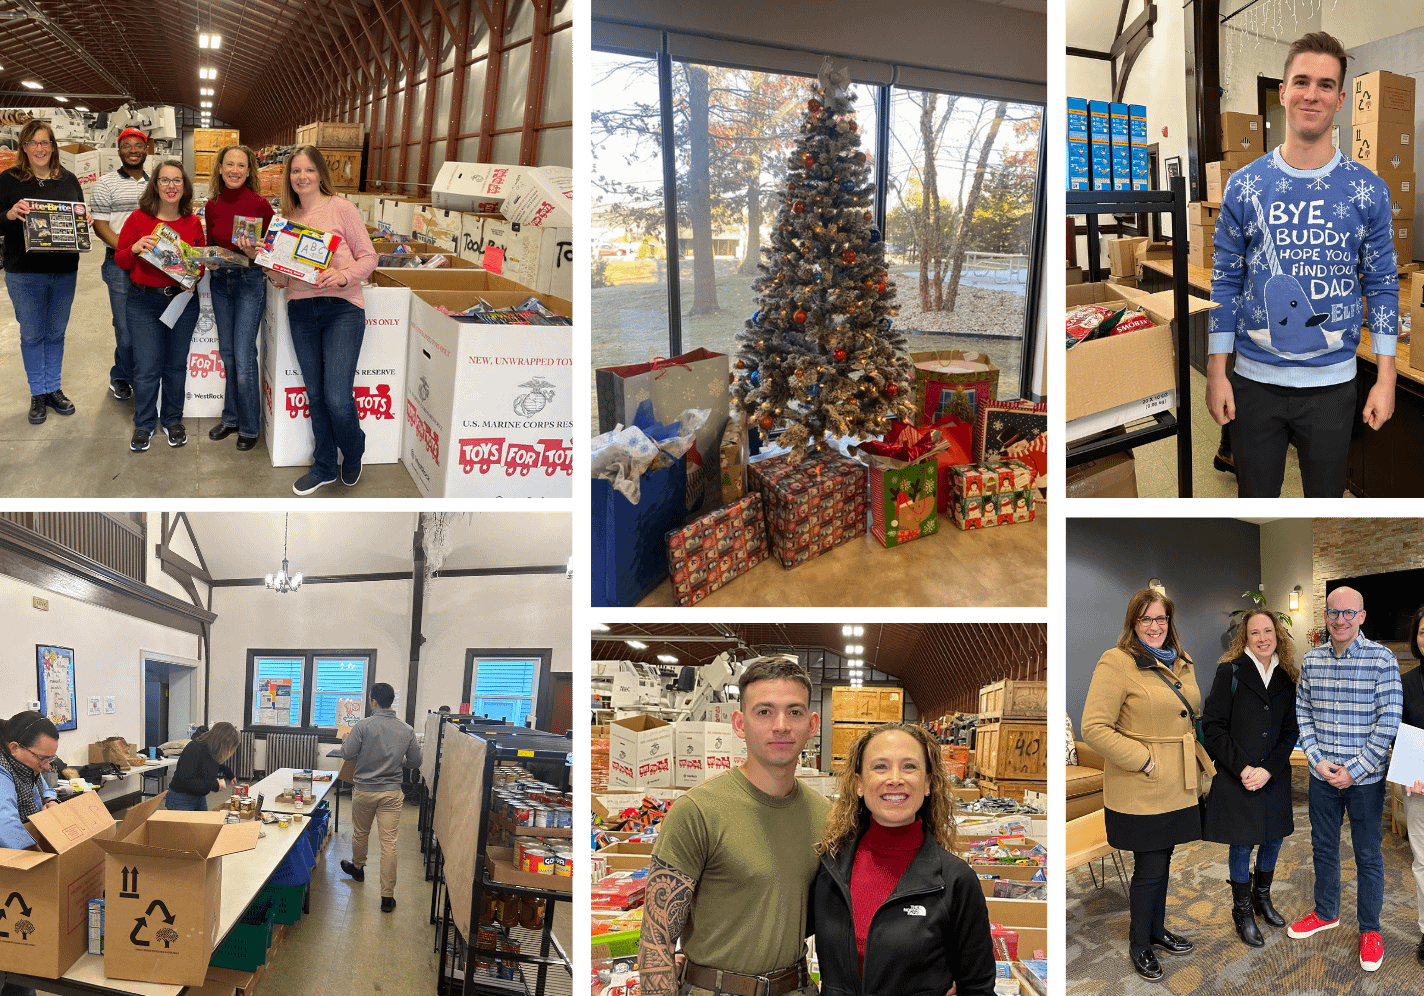 Photos from the different local organizations #TeamHPNE supported this holiday season.